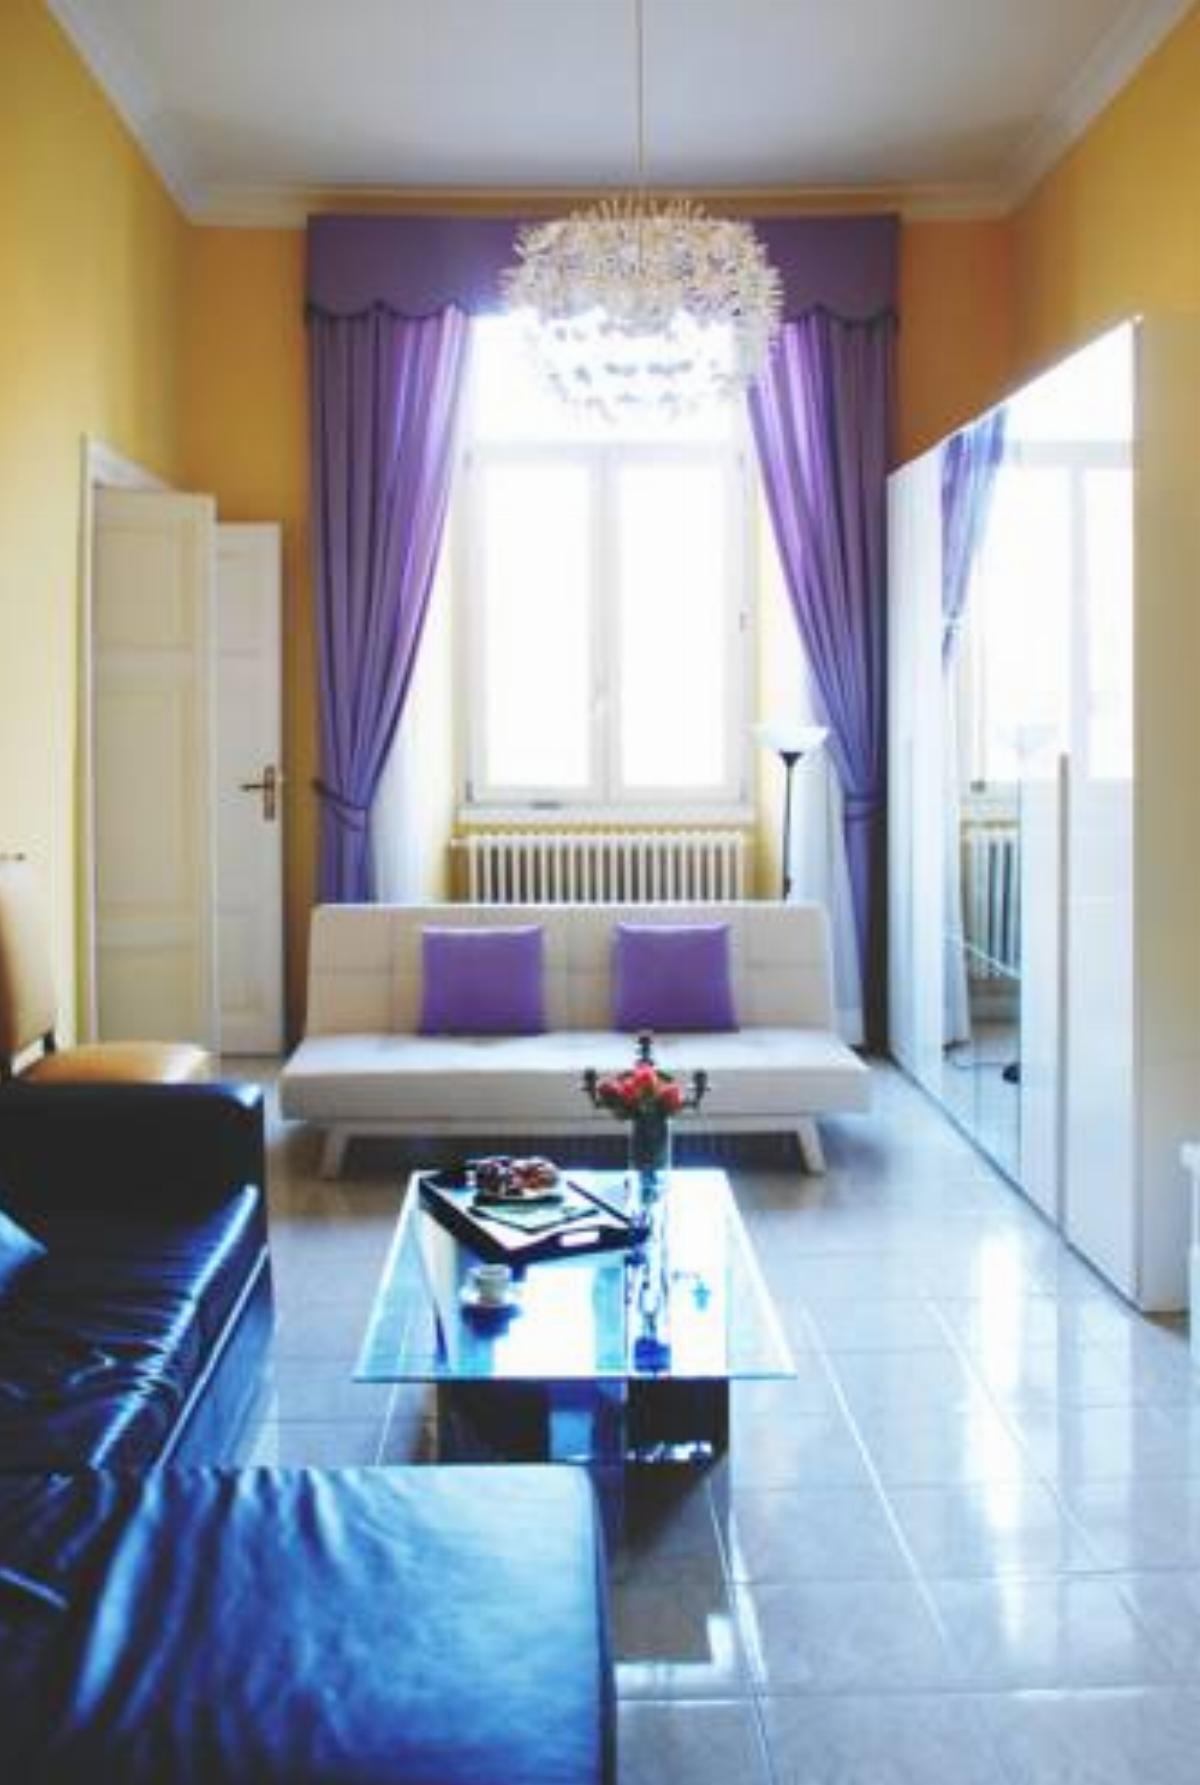 Bed and Breakfast Piazza Vittorio87 Hotel Roma Italy